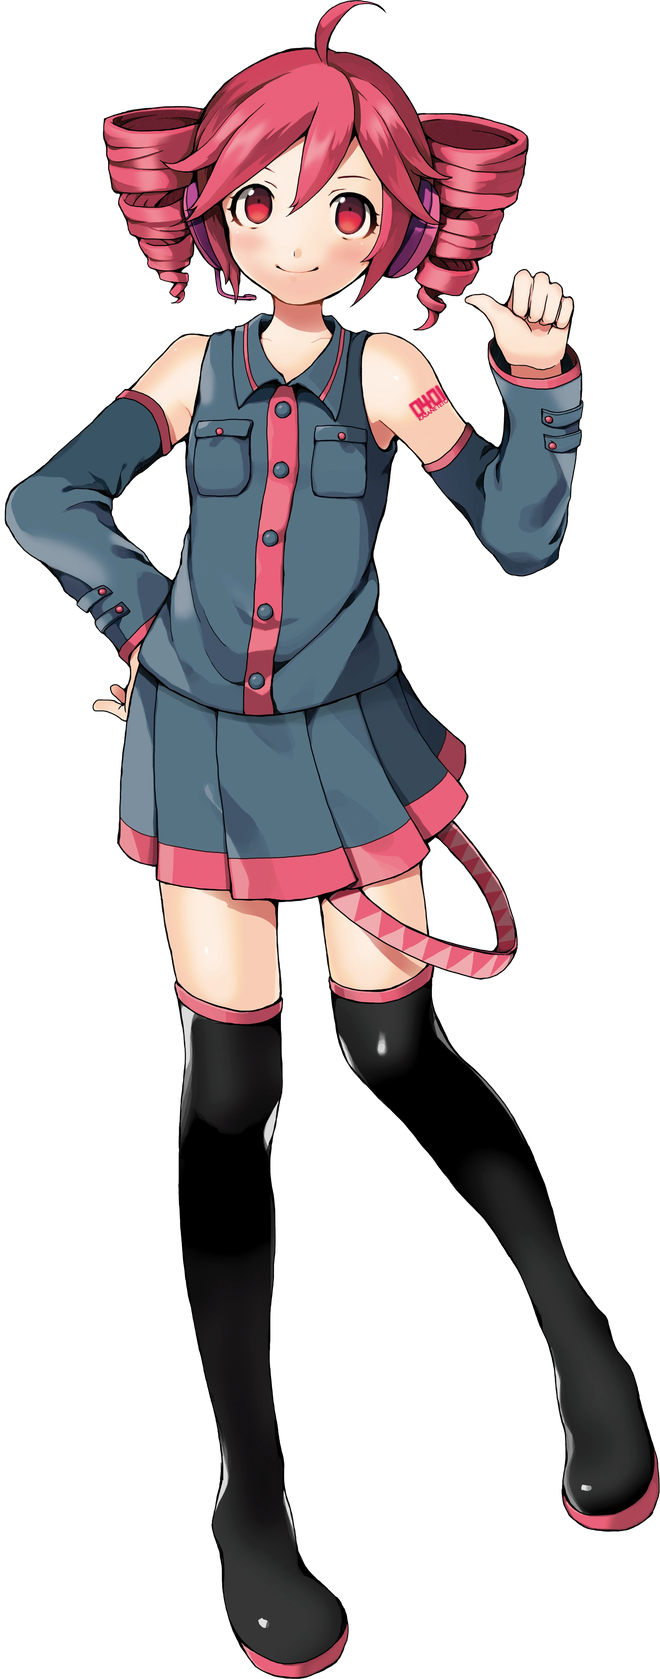 Kasane Teto, a vocal synthesizer who is a Chimera but presents as a human. She has pink hair which has drill-like pigtails referred to as twindrills, as well as a cowlick on the middle of her head. She has red eyes. She is wearing a gray button-up tanktop and skirt with pink accents around the ends and center, and half-sleeves showing her upper arms, where her pink 0401 can be seen. She is wearing a pink belt with a triangular geometric pattern that forms a loop which rests on her left thigh. She is wearing purple headphones over her ears. She is also wearing black thigh-high boots with pink soles and pink accents at the top. Her right hand is resting on her hip while her left hand is pointing her thumb towards her face